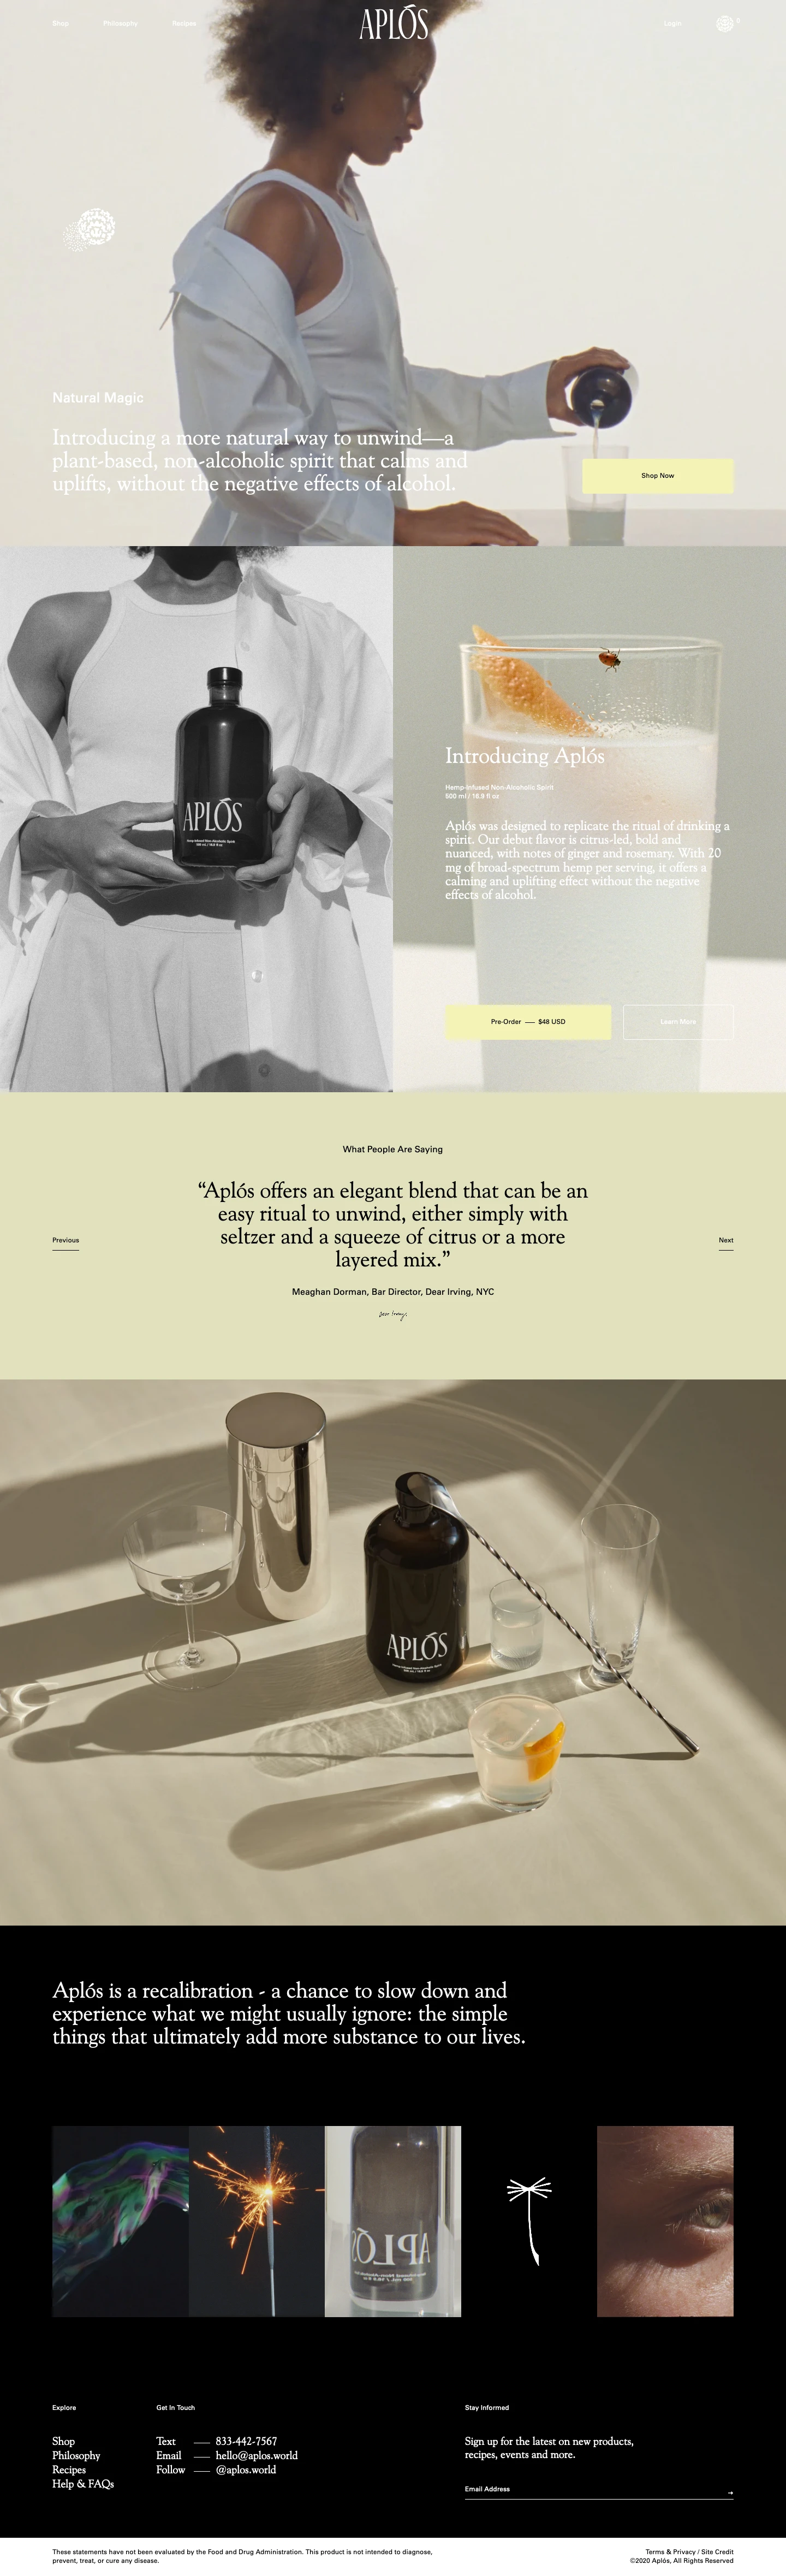 Aplós Landing Page Example: Aplós is a hemp-infused, non-alcoholic spirit that calms and uplifts without the negative effects of alcohol.